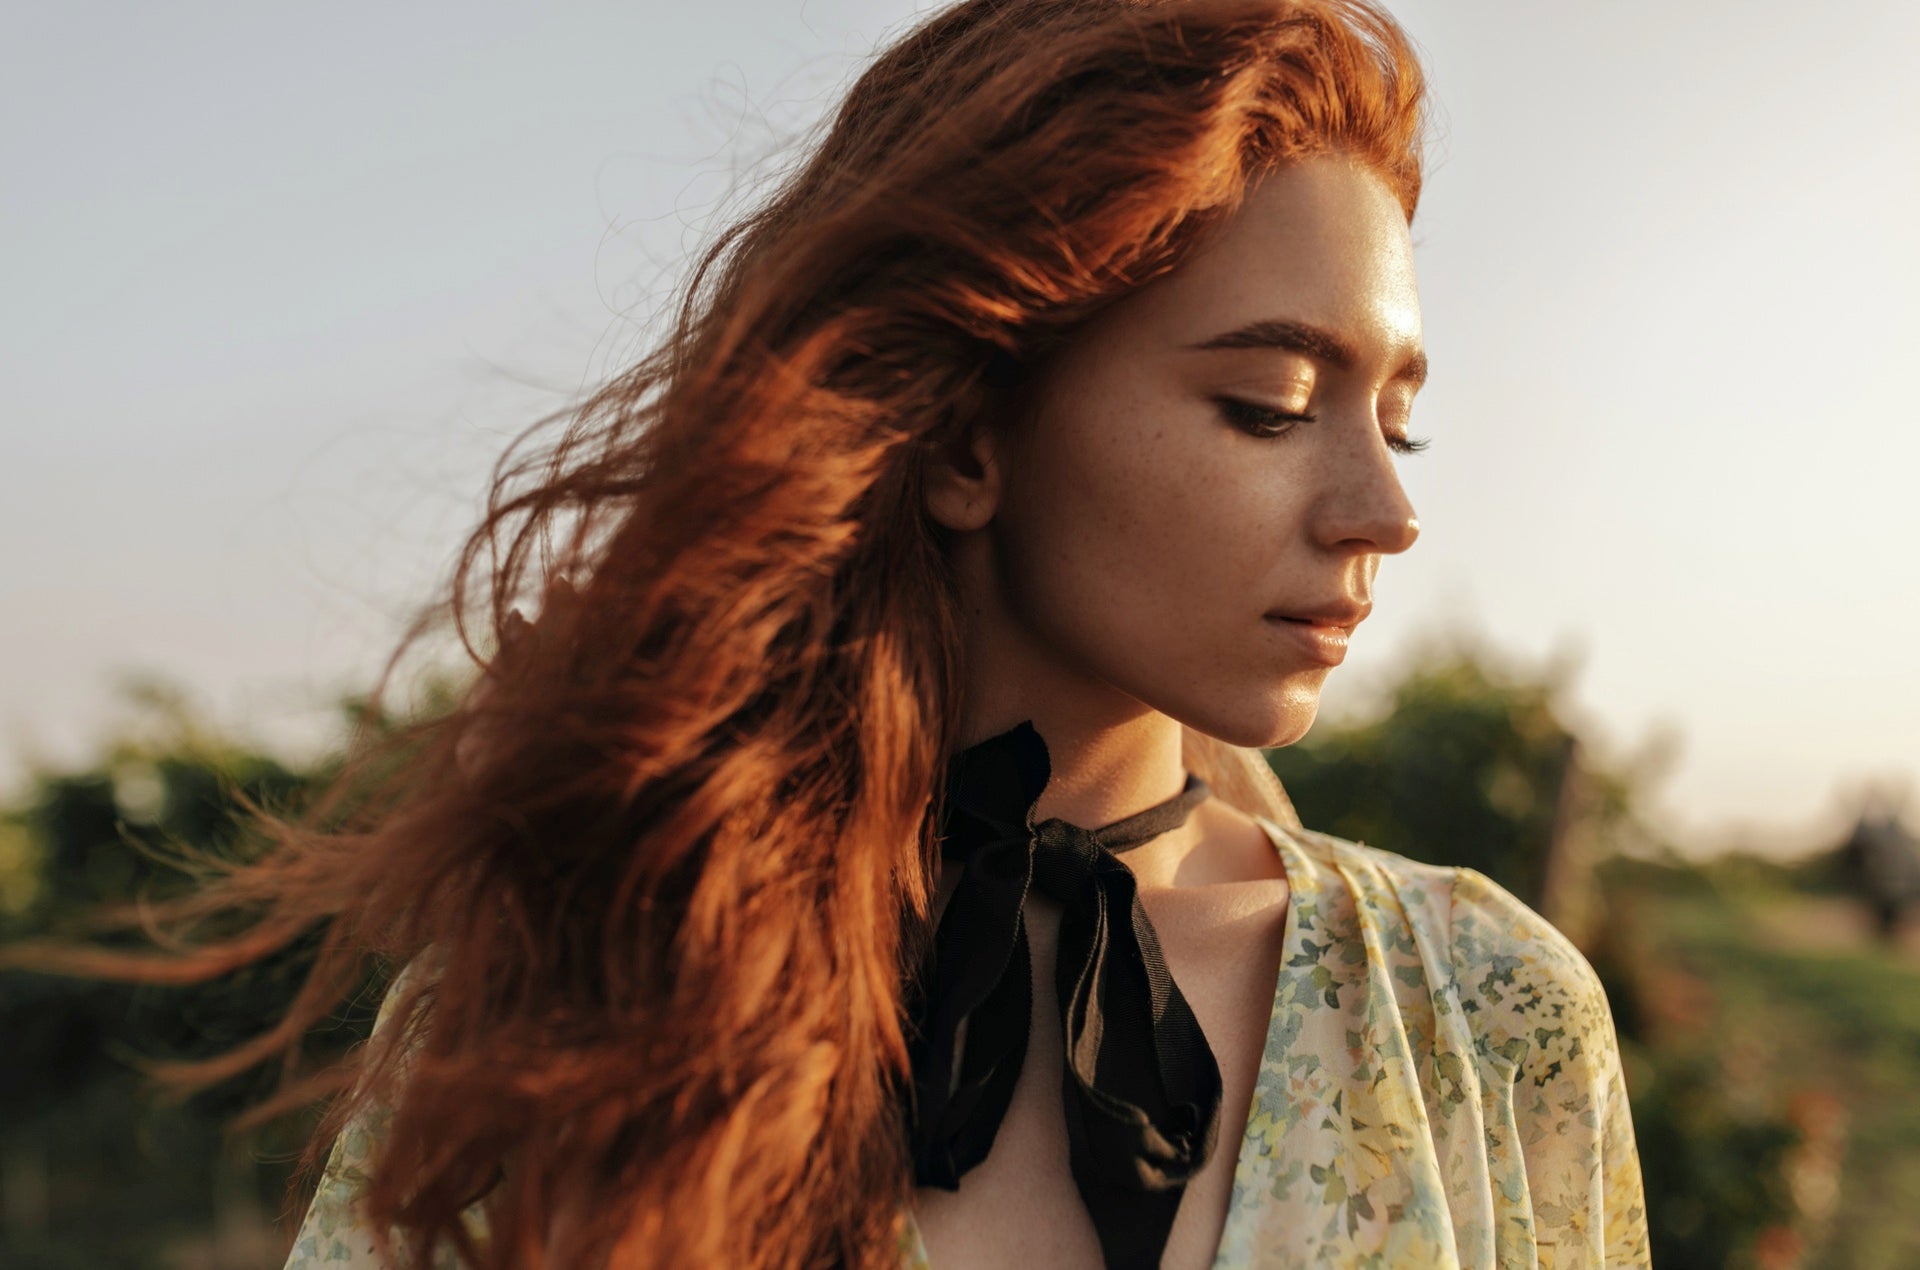 A woman with vibrant, wavy red hair bathed in golden sunlight. The gentle waves in her hair suggest the use of hair styling products to enhance its natural texture. A black ribbon is tied around her neck, and she wears a floral blouse, adding to the ethereal ambience of the image.